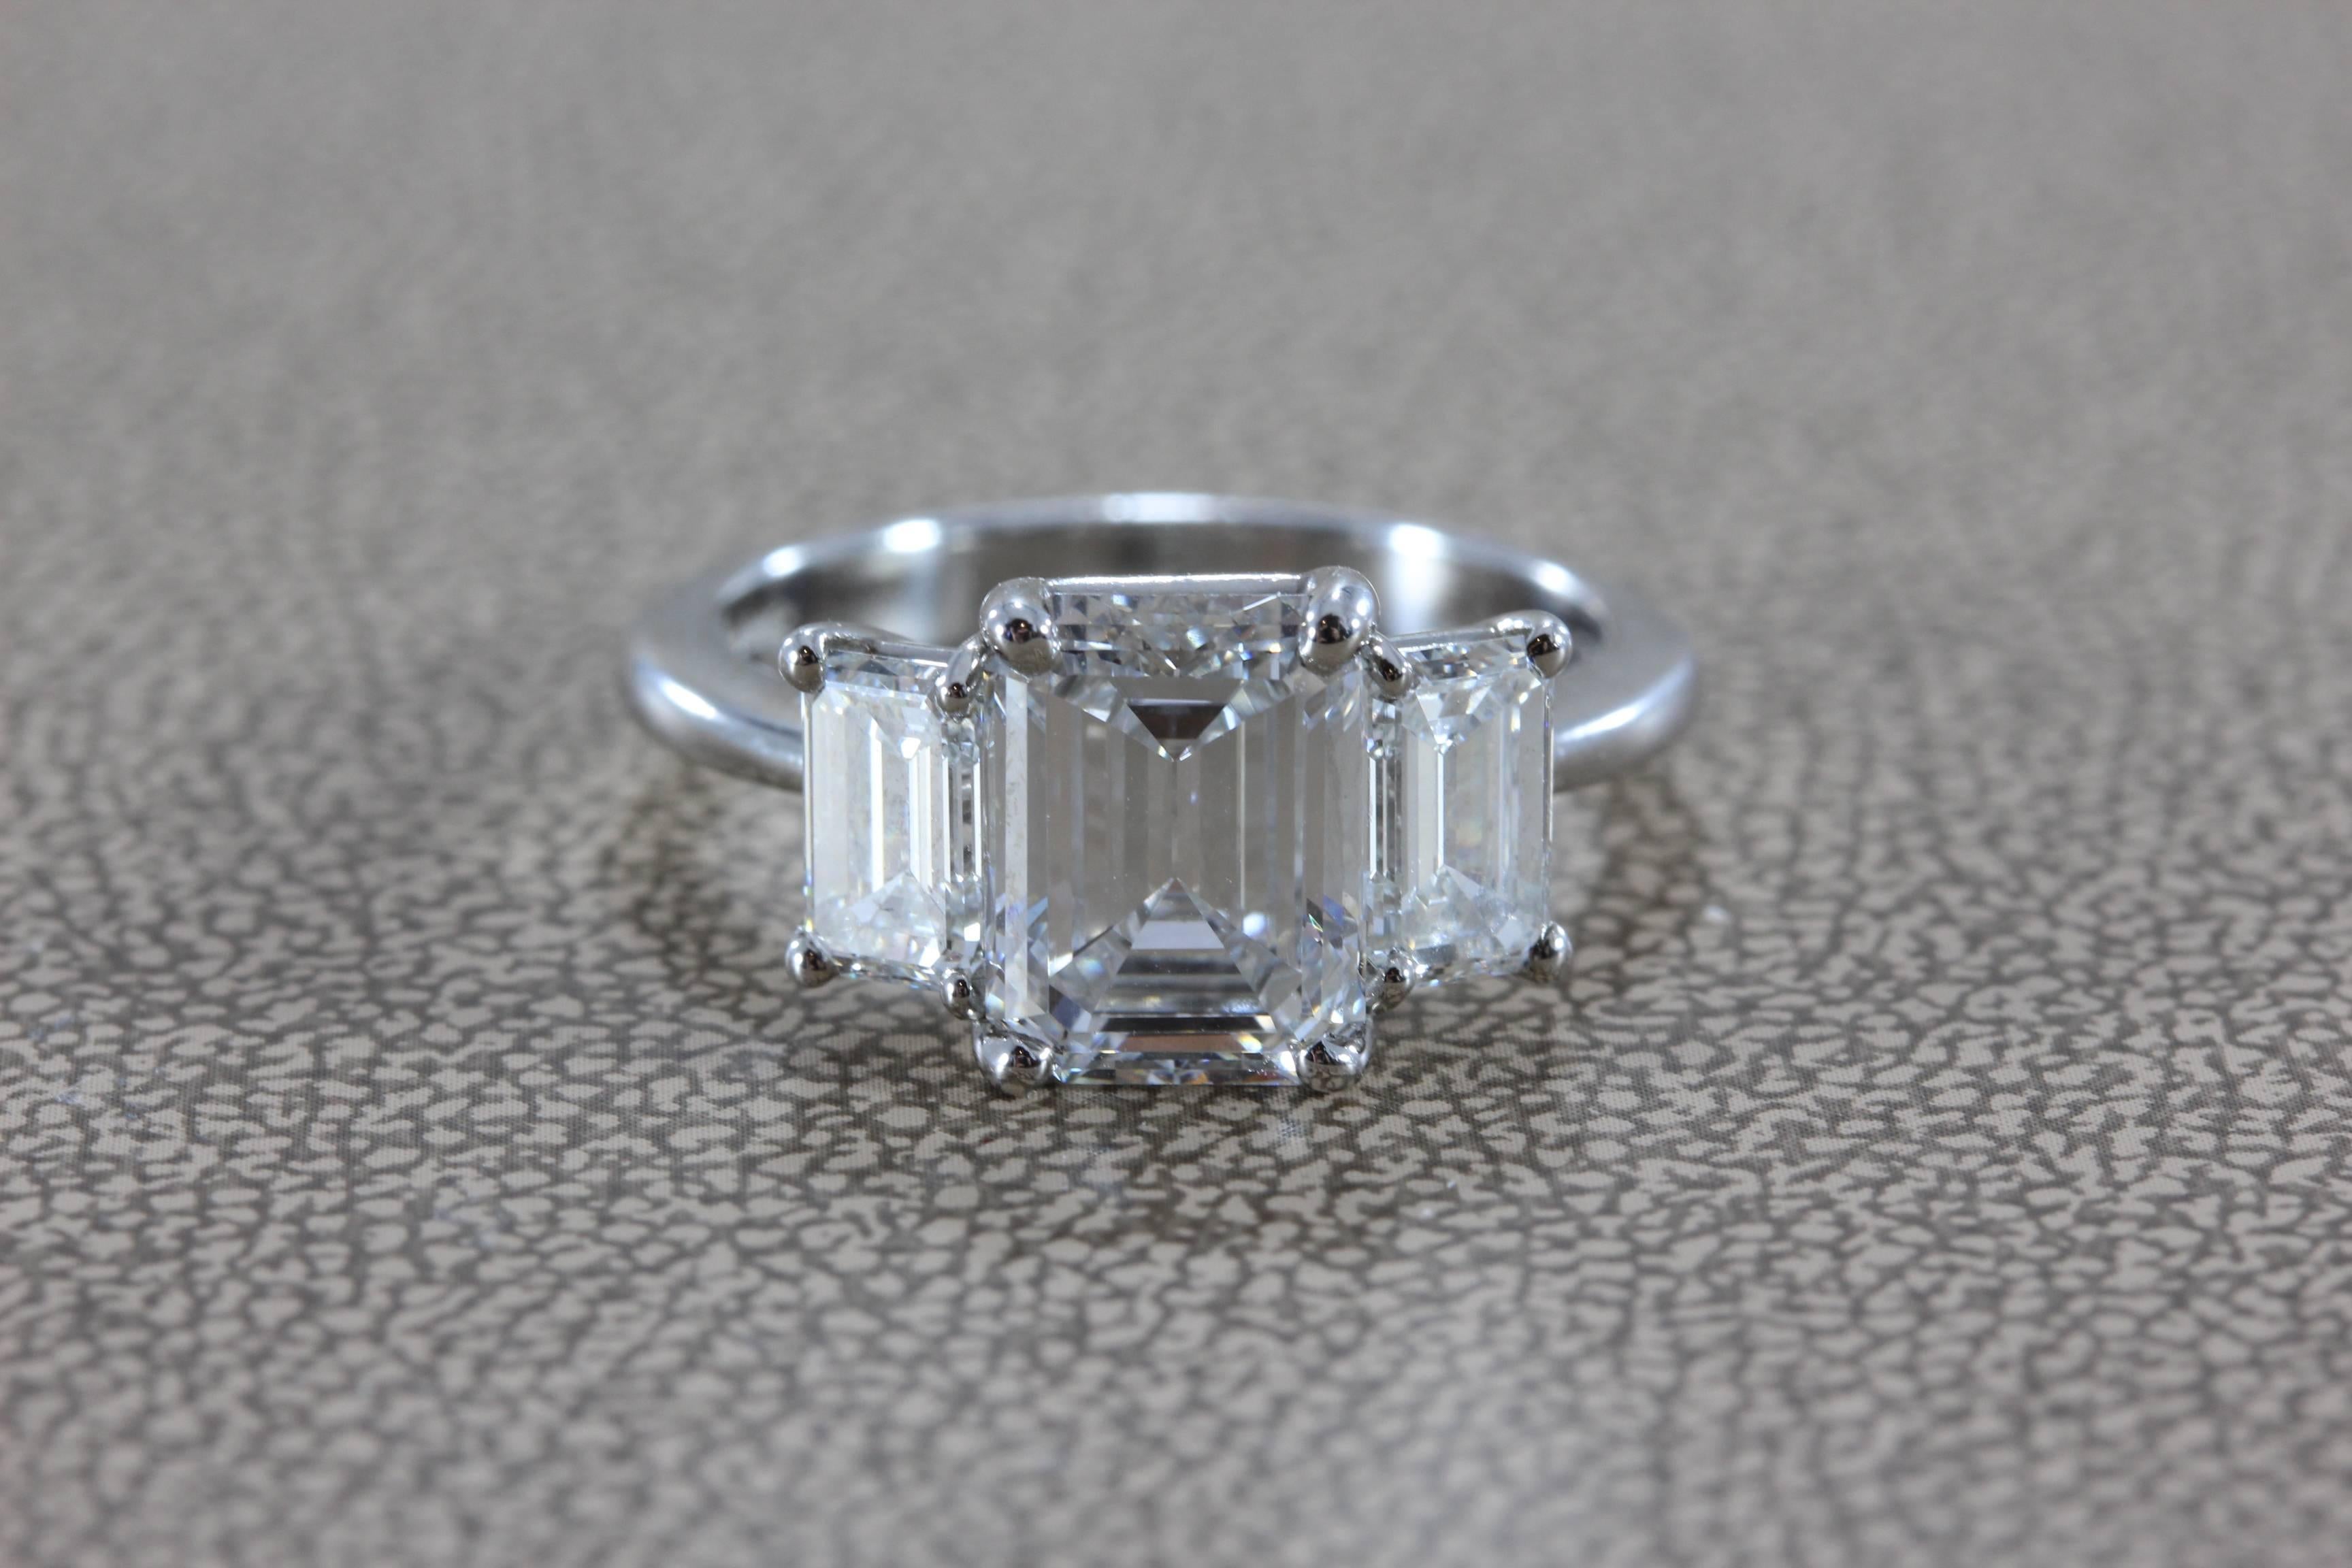 This luxurious engagement ring features a top quality 2.28 emerald cut diamond with E color and VVS2 clarity. The diamond is beautifully cut with excellent proportions and no florescence, a true top-grade gem of a diamond. There are two smaller